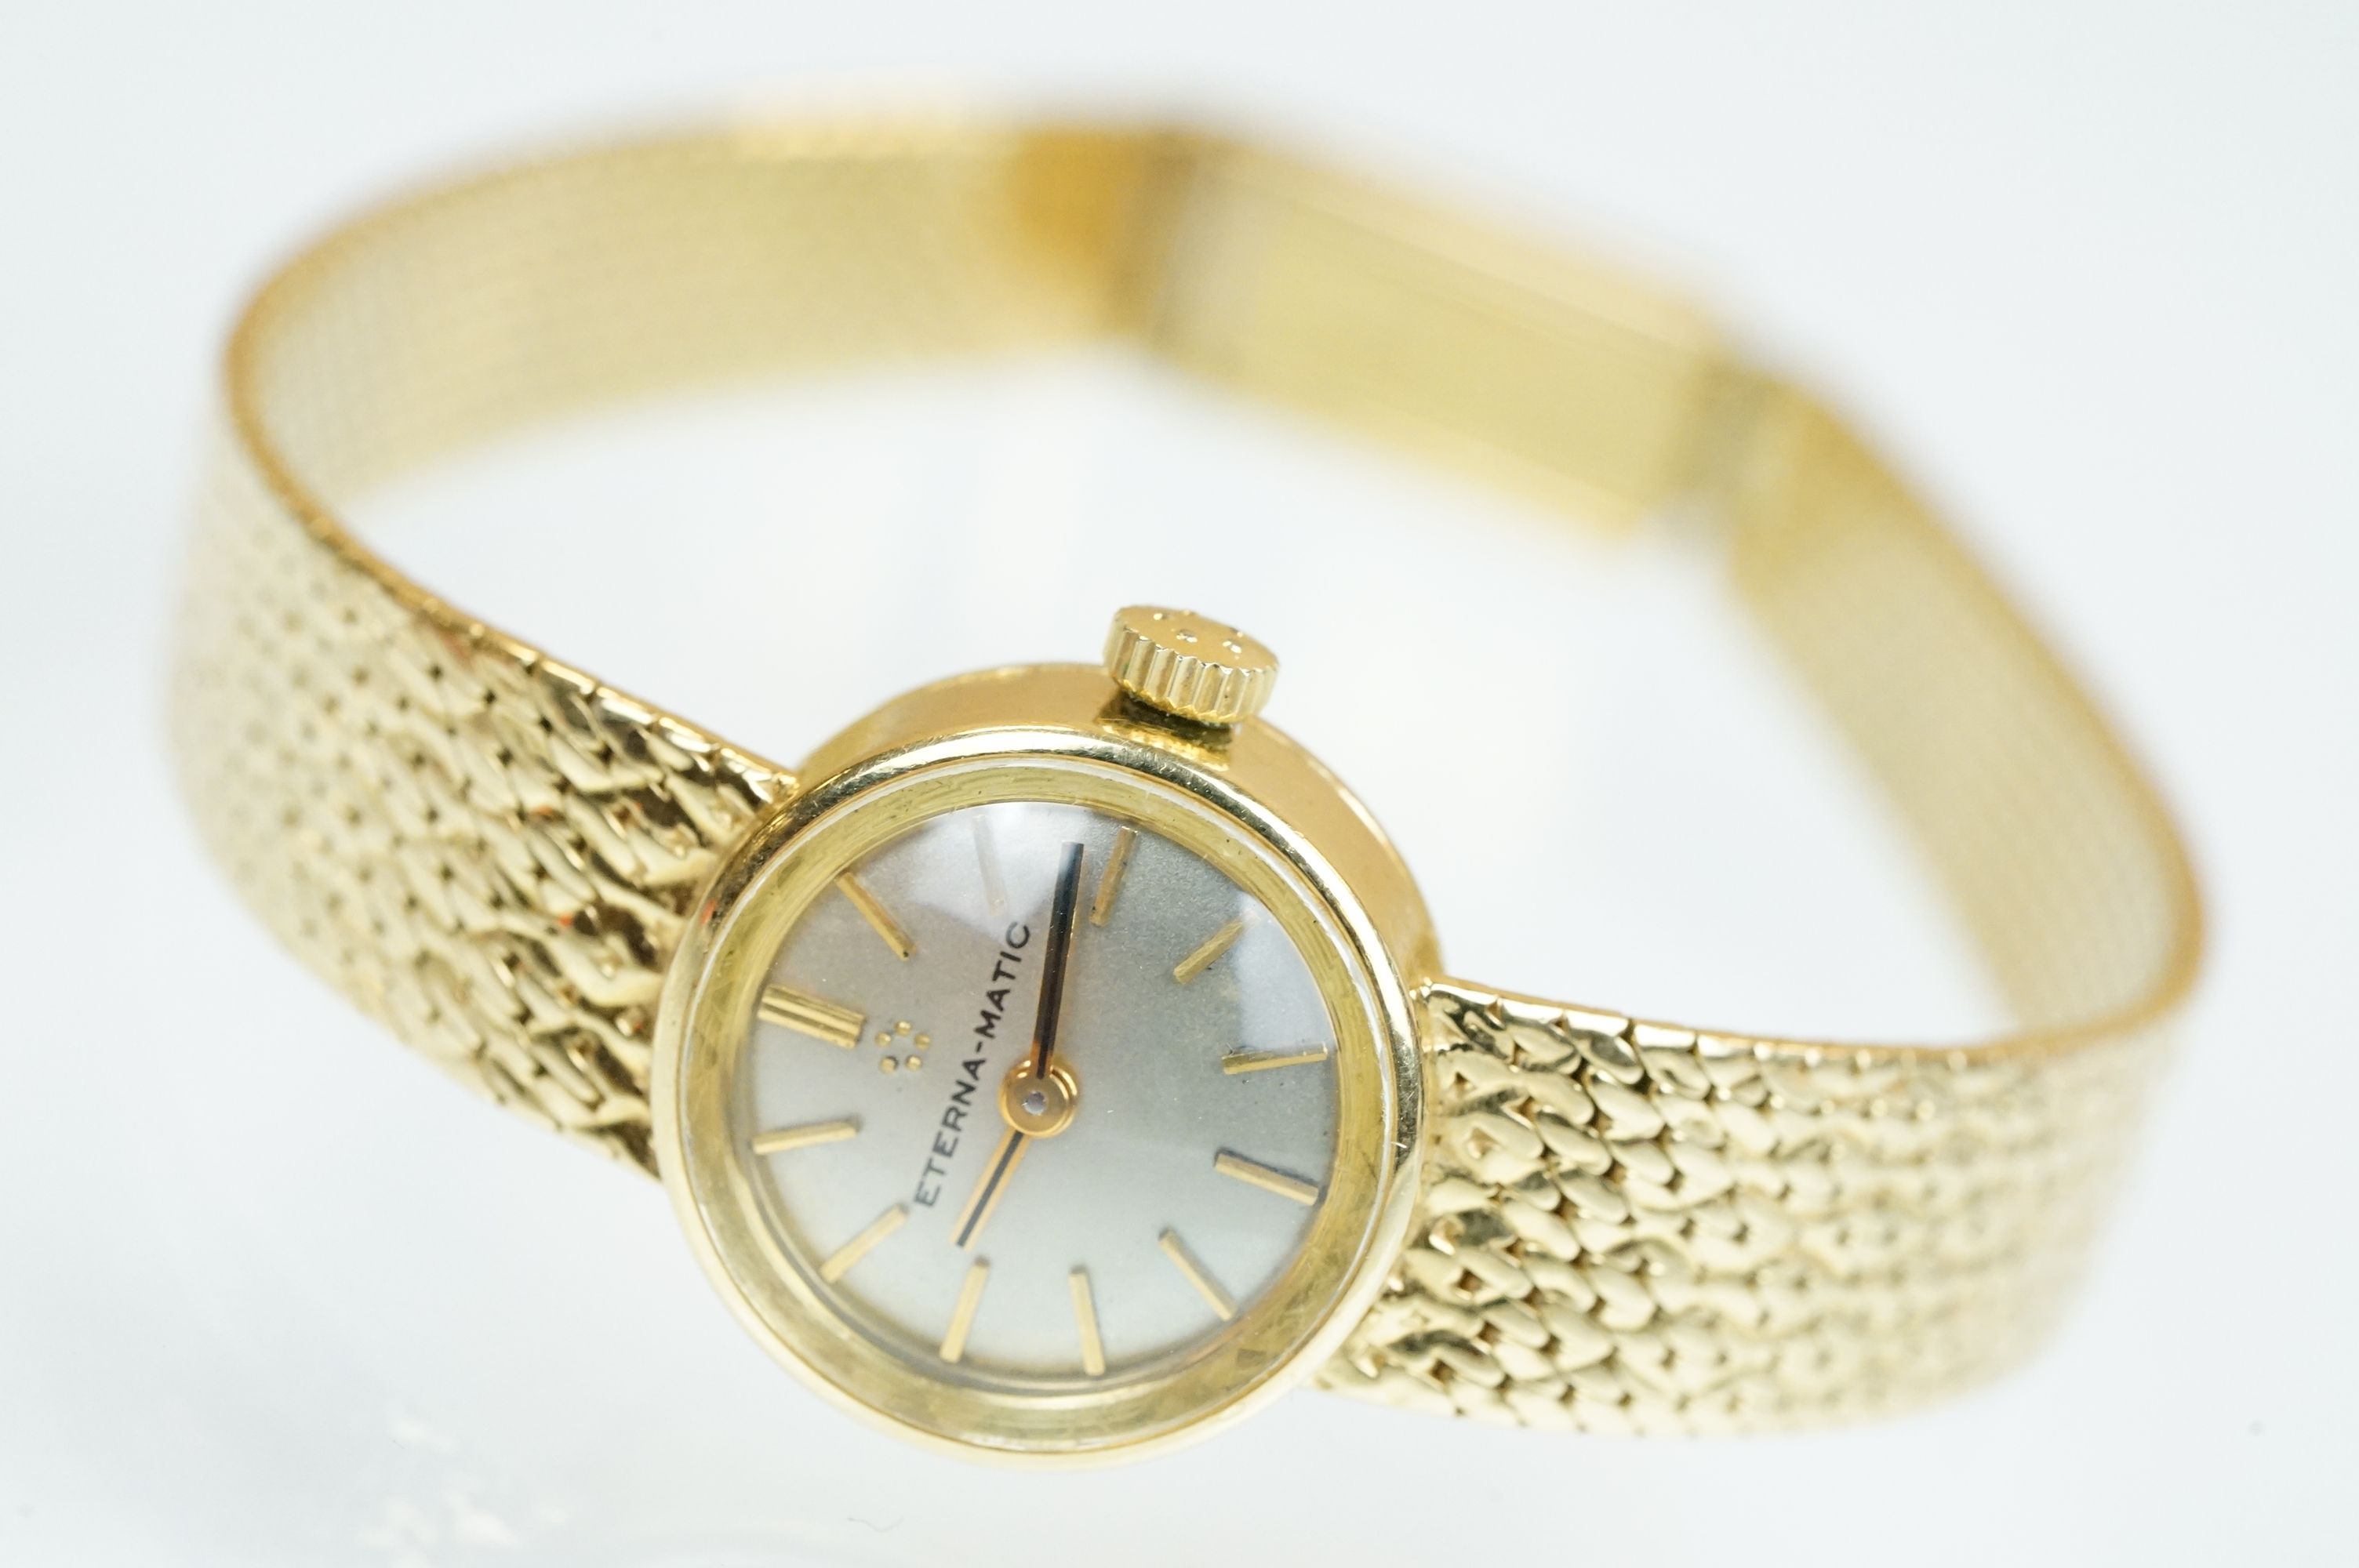 18ct gold ladies Eterna-matic 18ct gold cocktail wrist watch having a round face with baton